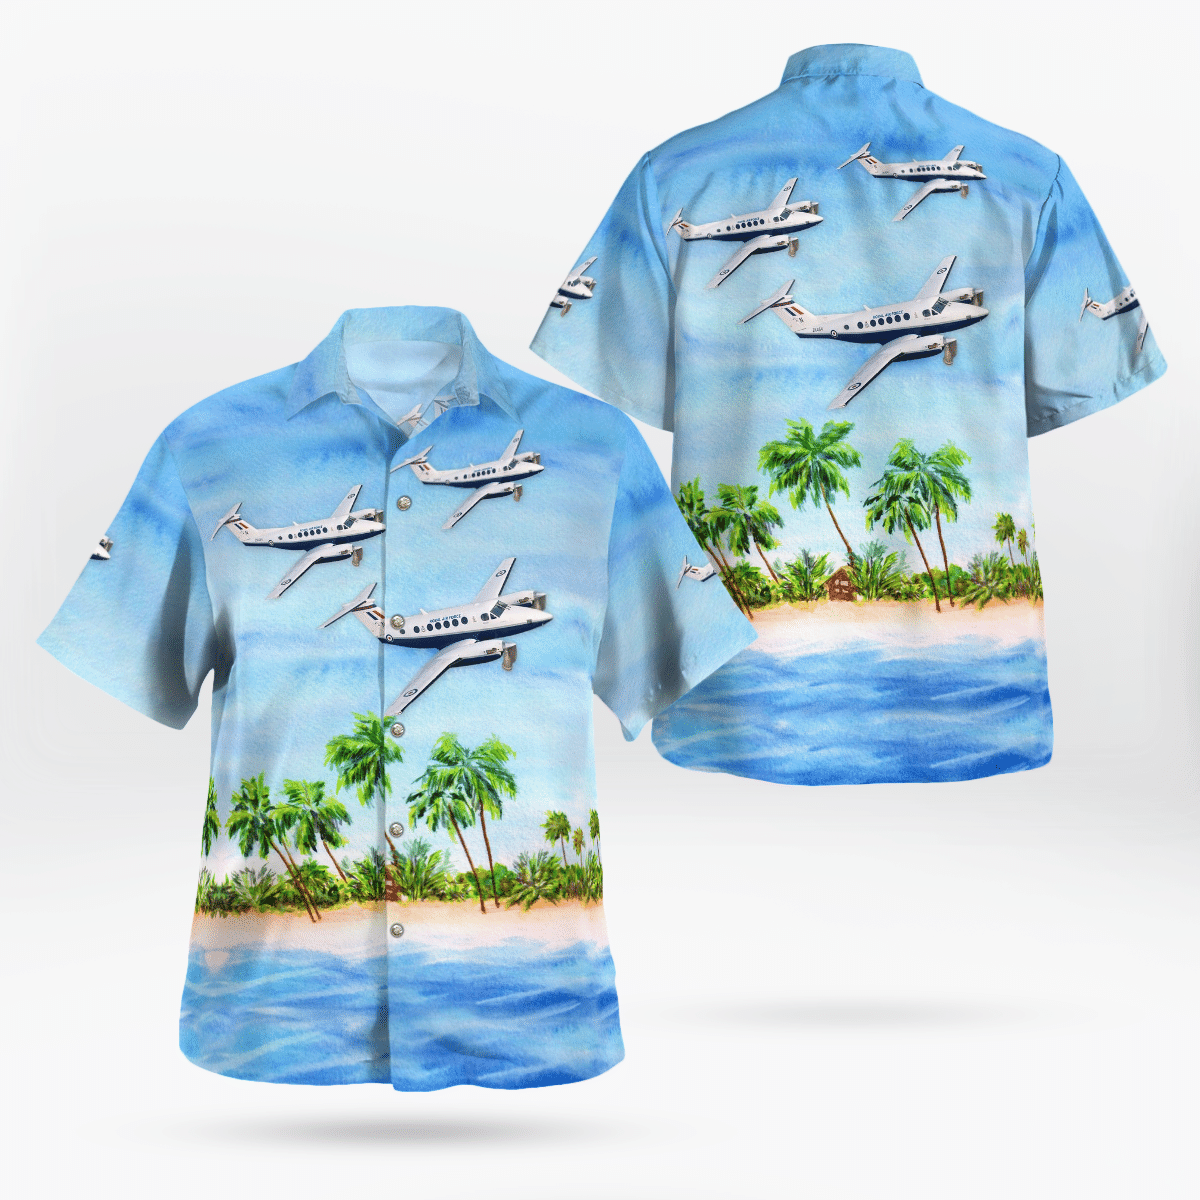 Some cool 3d hawaii shirt for this summer 2